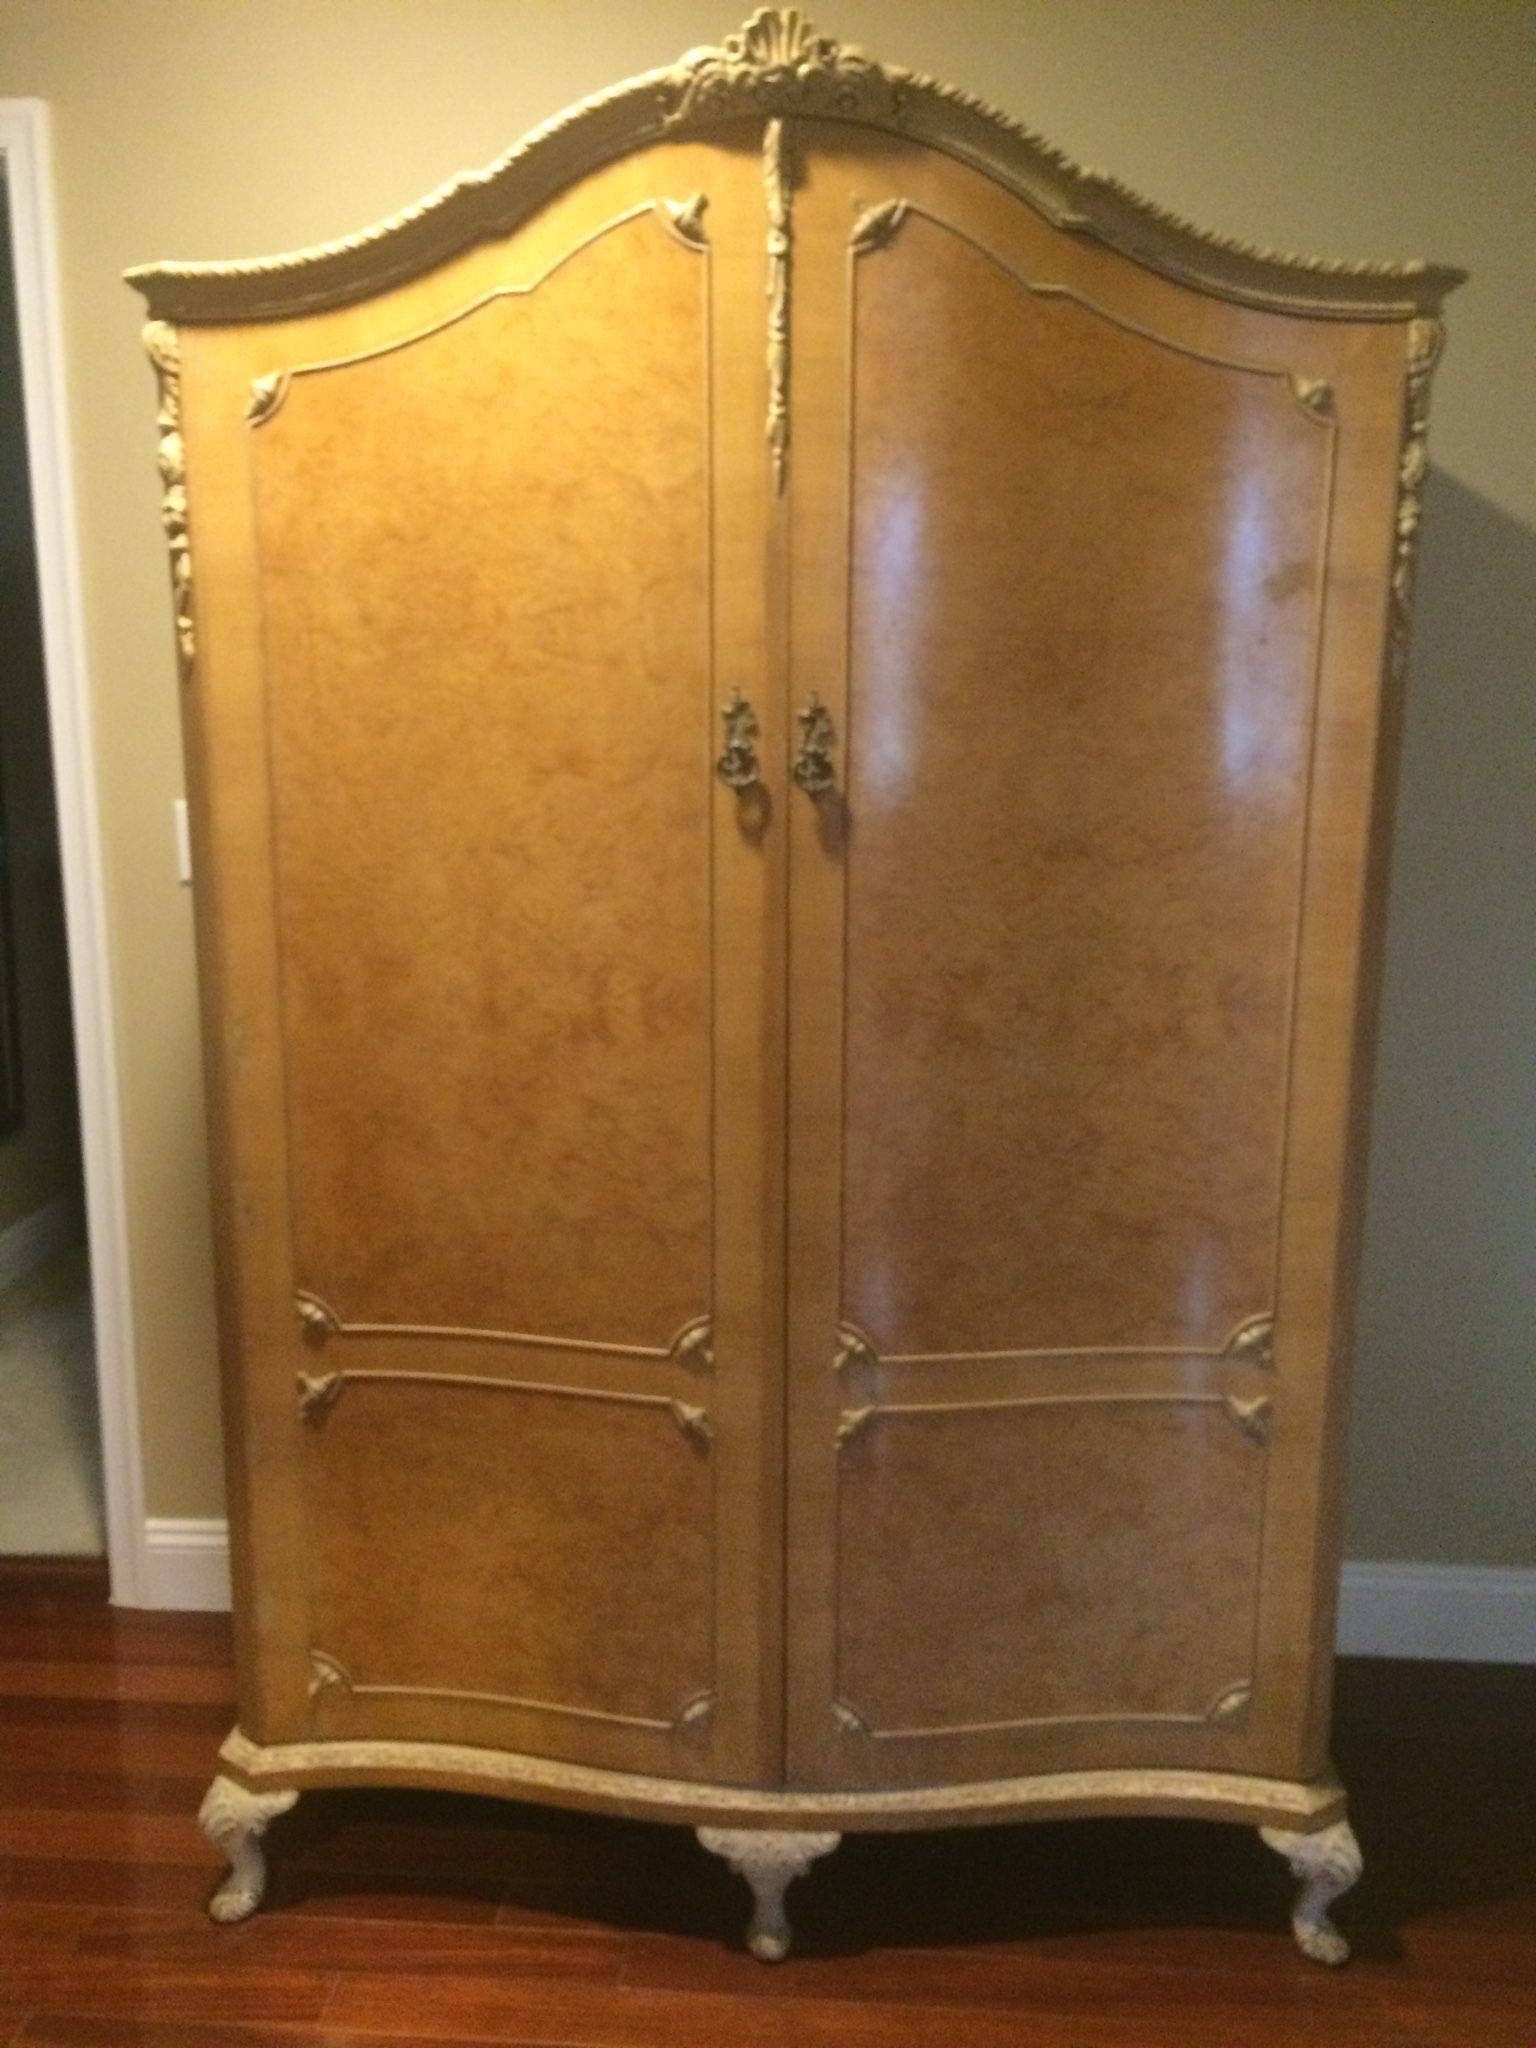 Antique armoire. Valued at over 2000